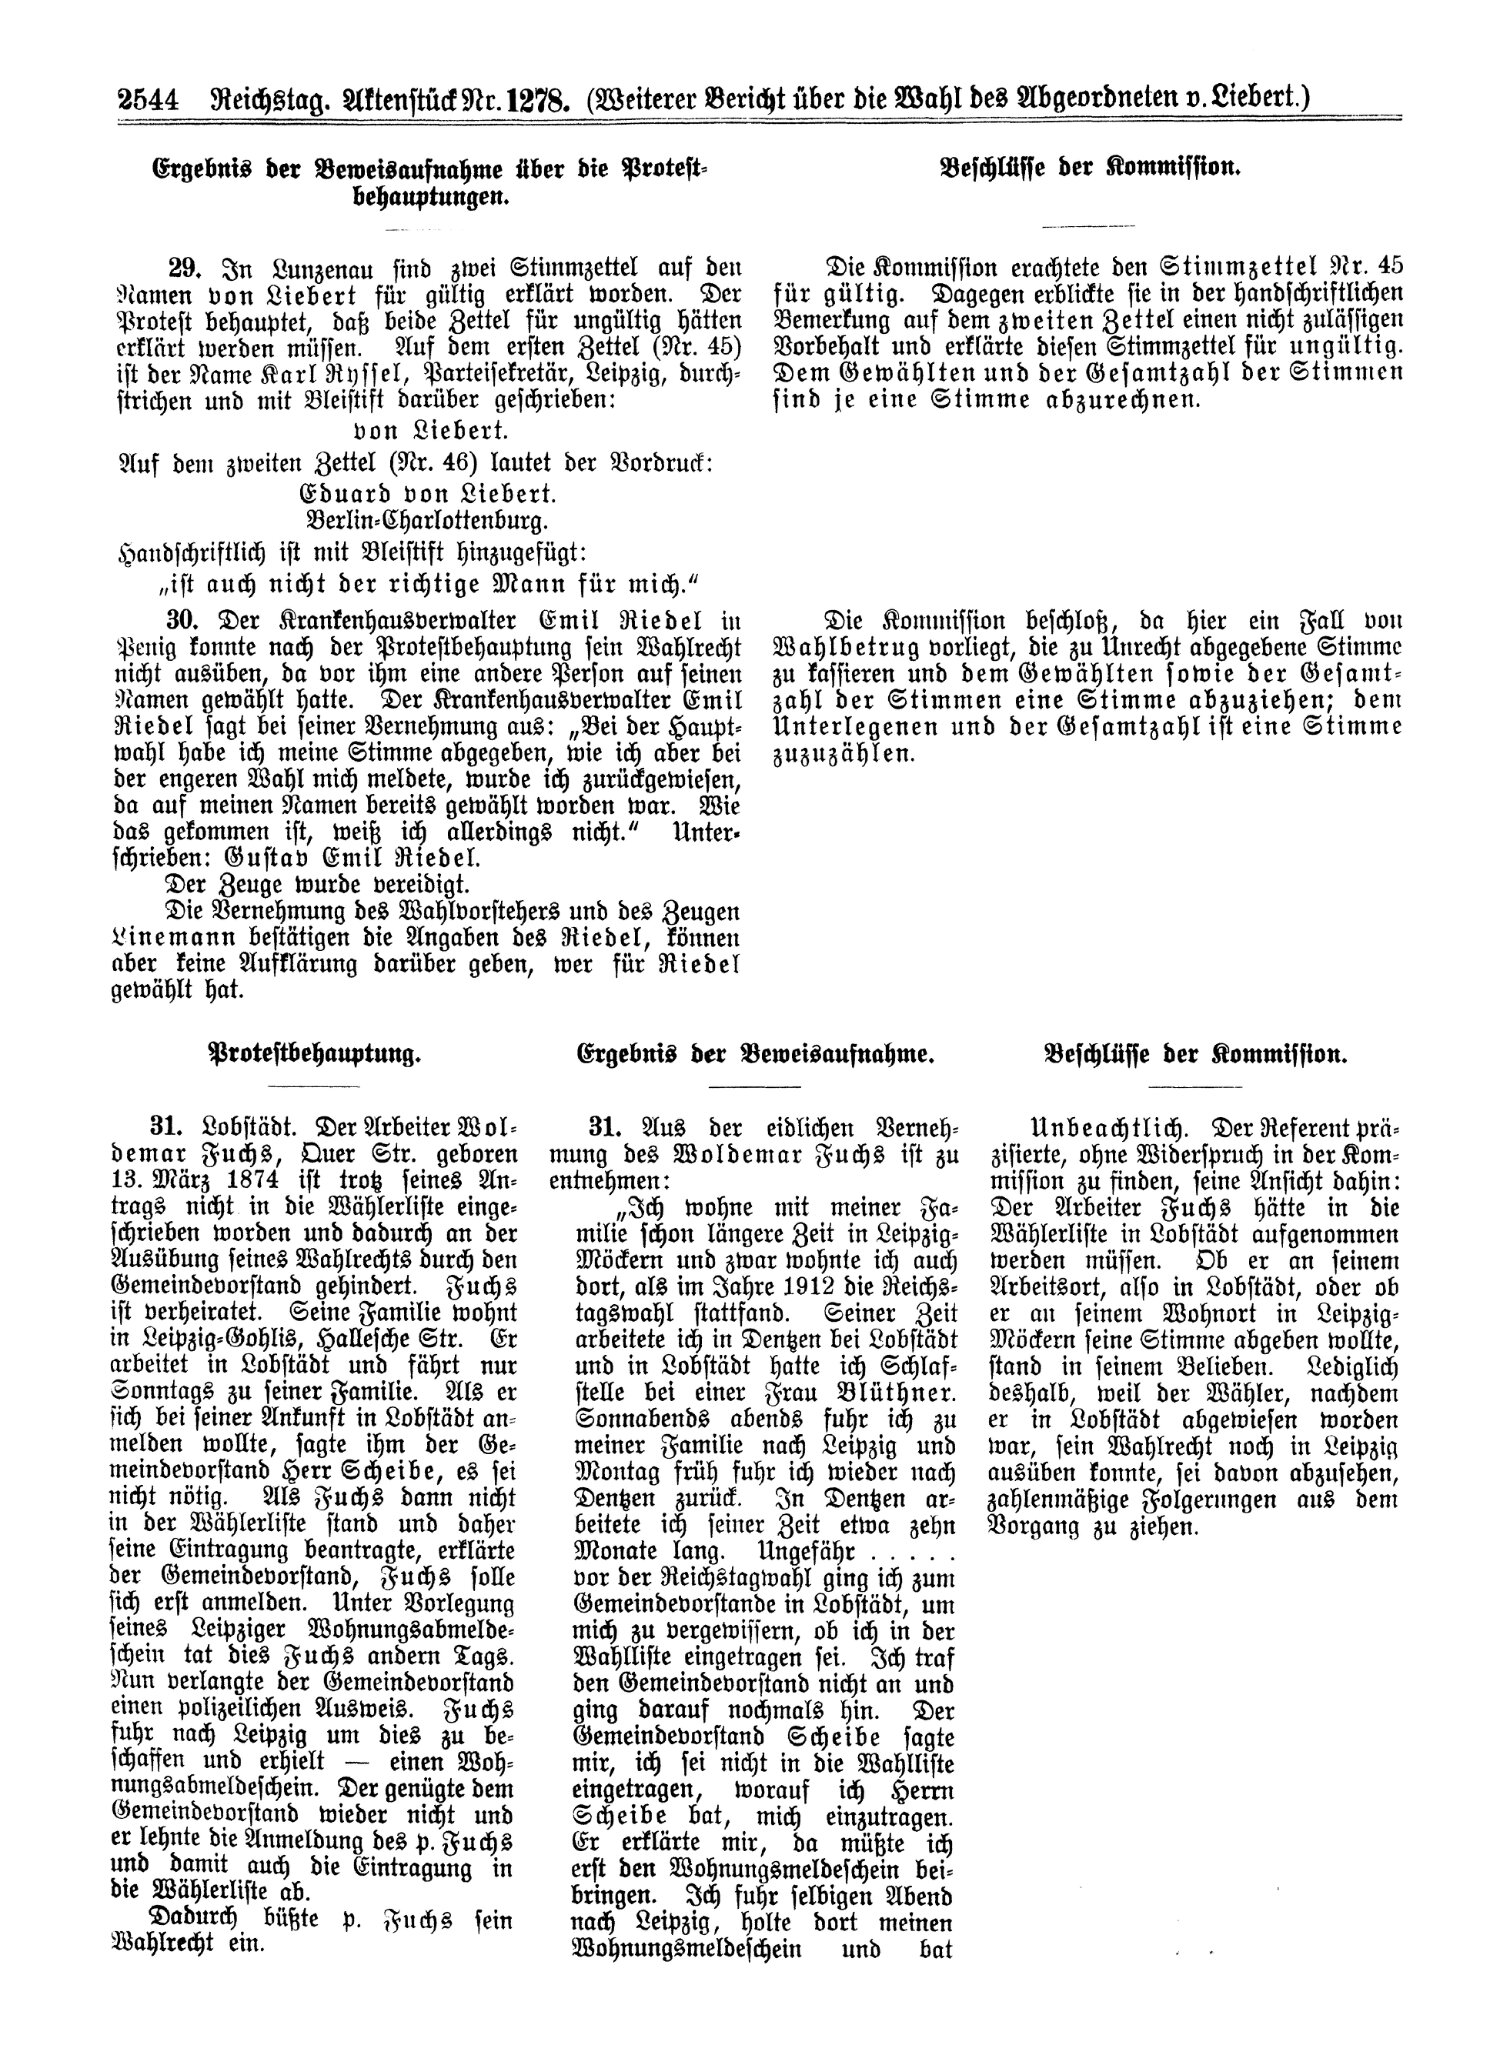 Scan of page 2544